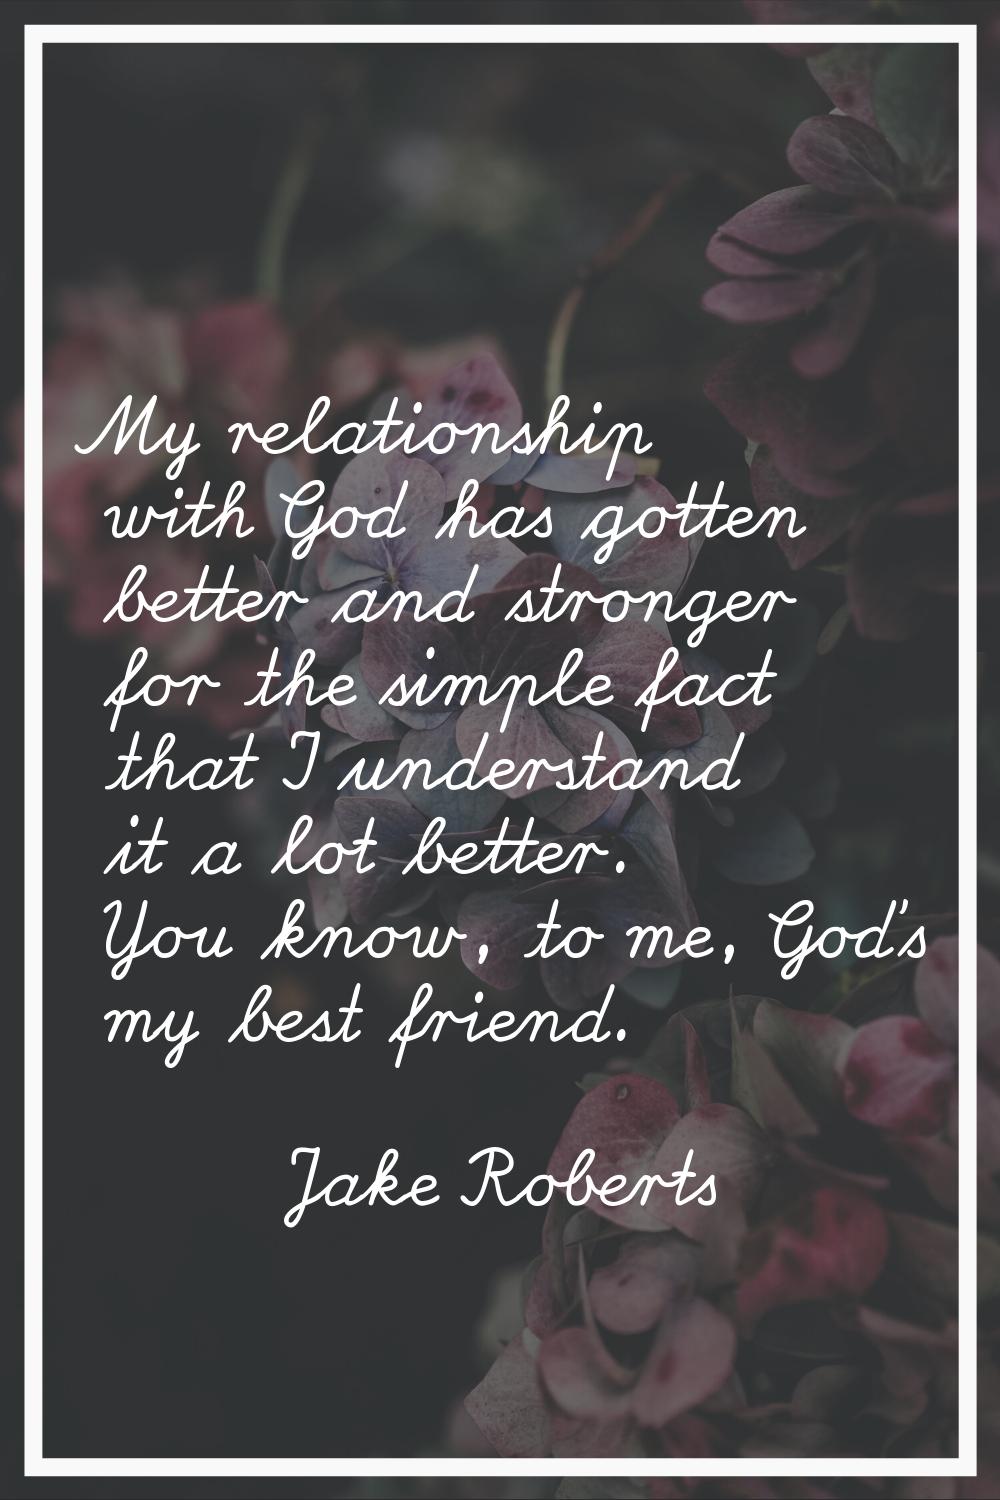 My relationship with God has gotten better and stronger for the simple fact that I understand it a 